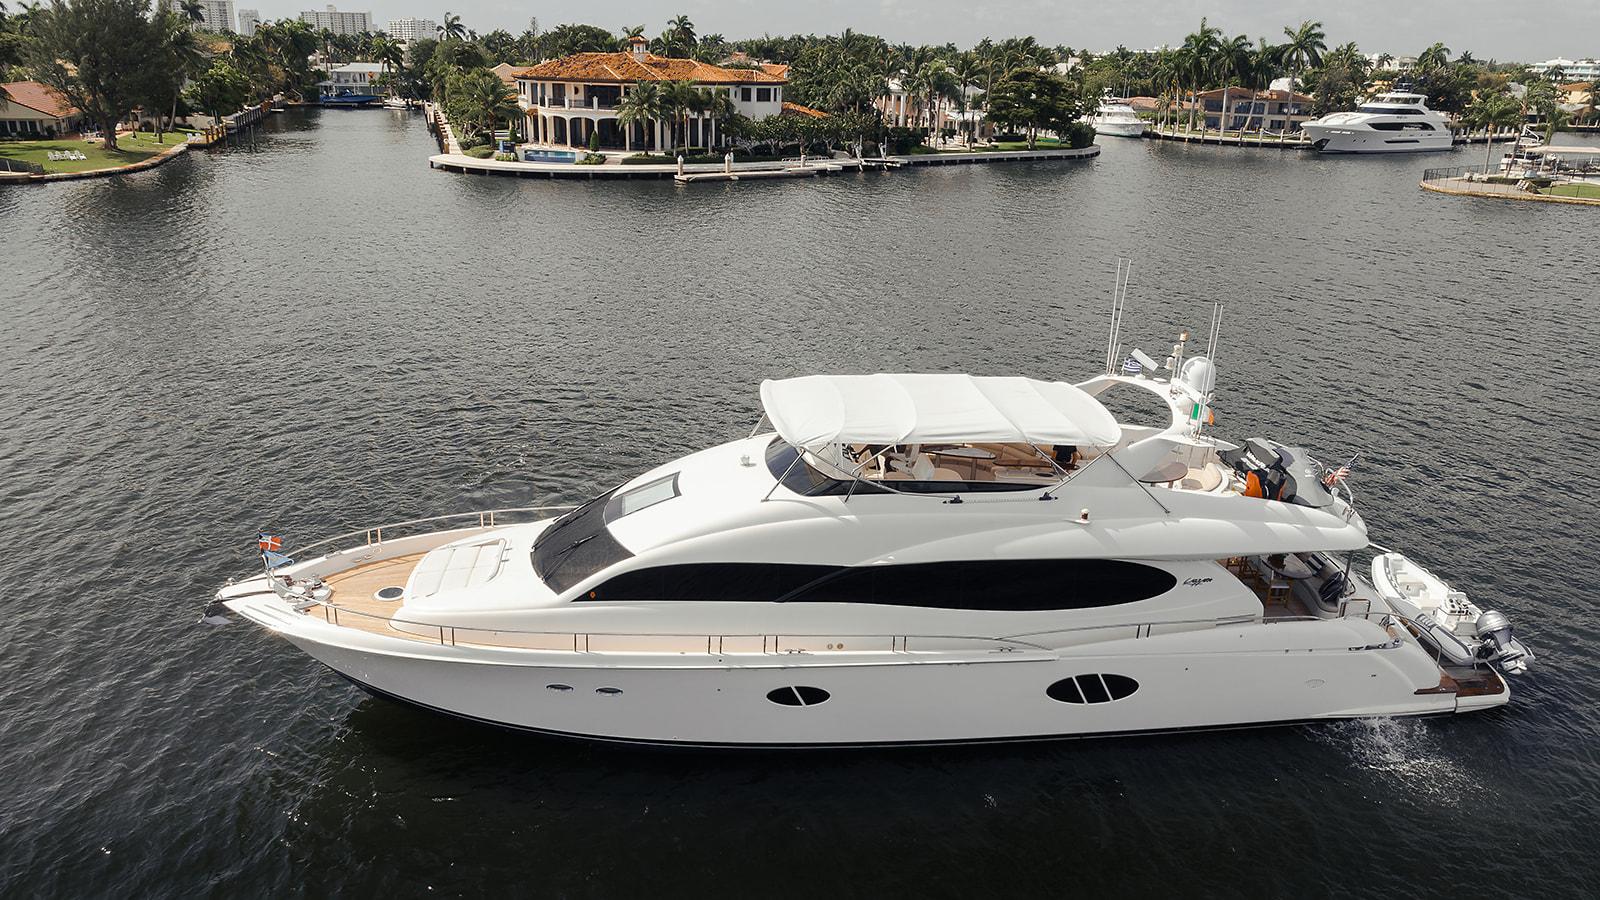 Used 2007 Lazzara Motor Yacht 84, 33316 Fort Lauderdale - Boat Trader